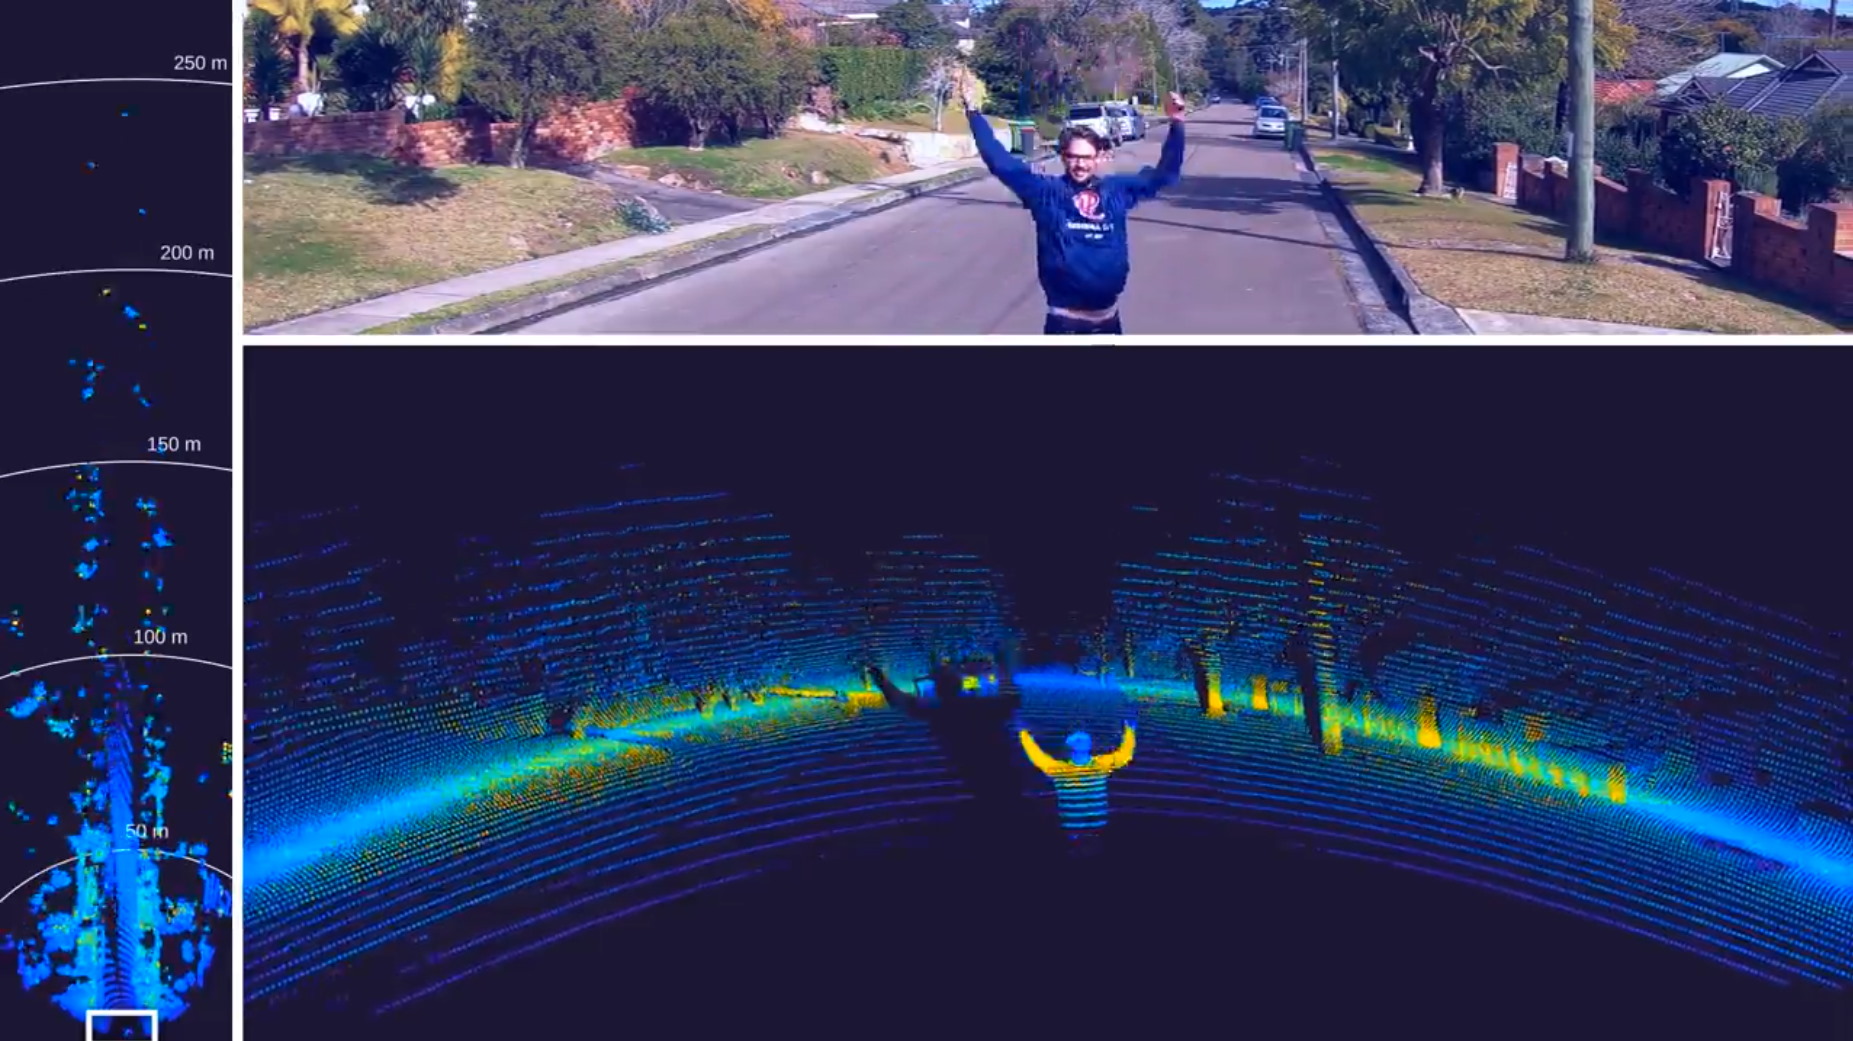 Baraja S Unique And Ingenious Take On Lidar Shines In A Crowded